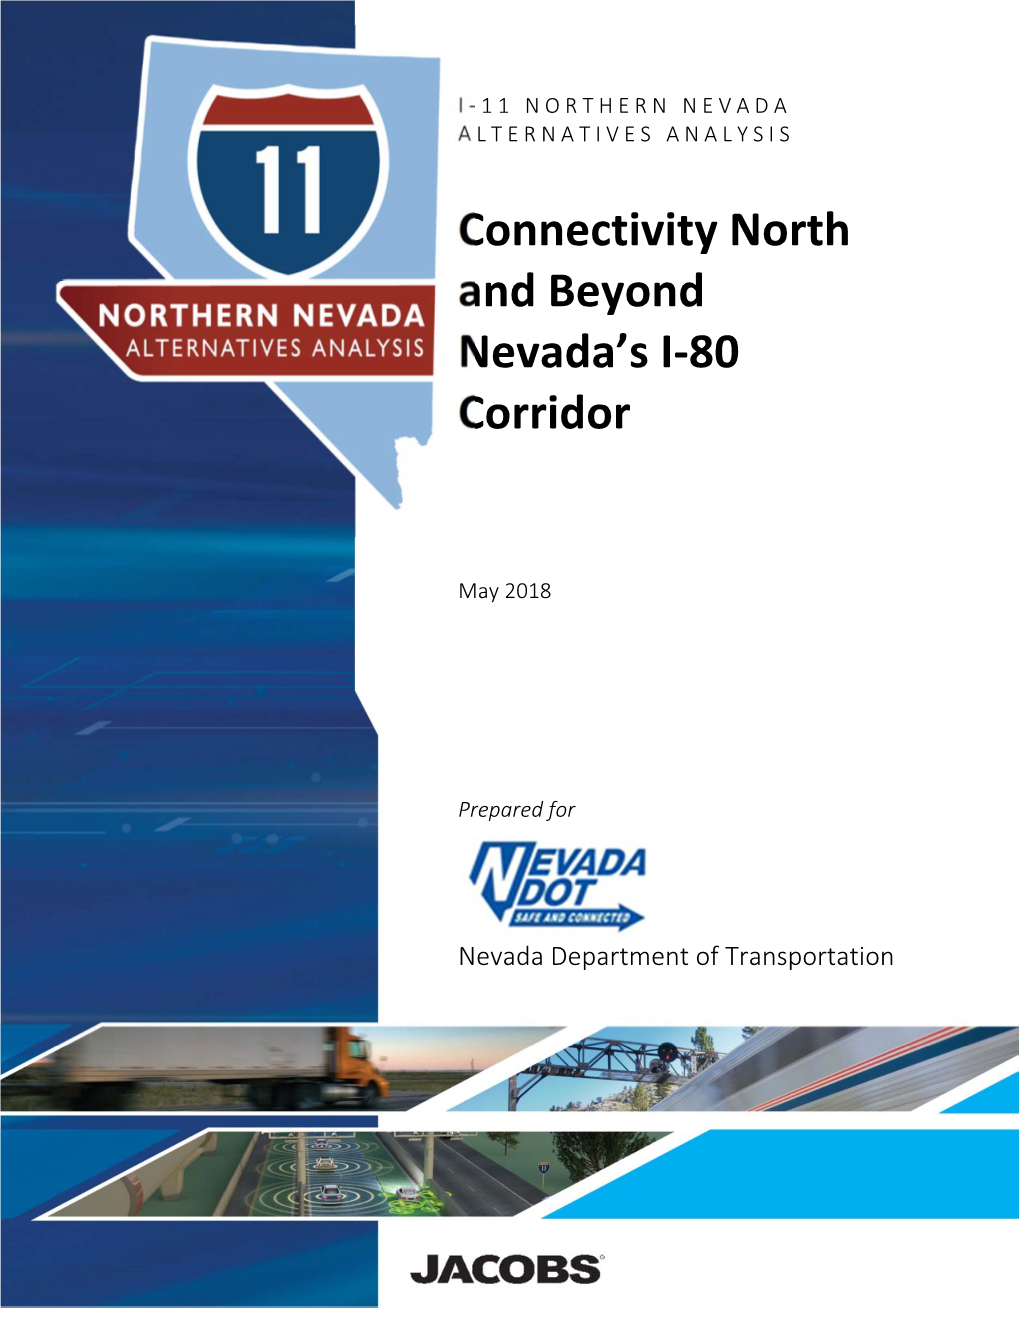 Connectivity North and Beyond Nevada's I-80 Corridor